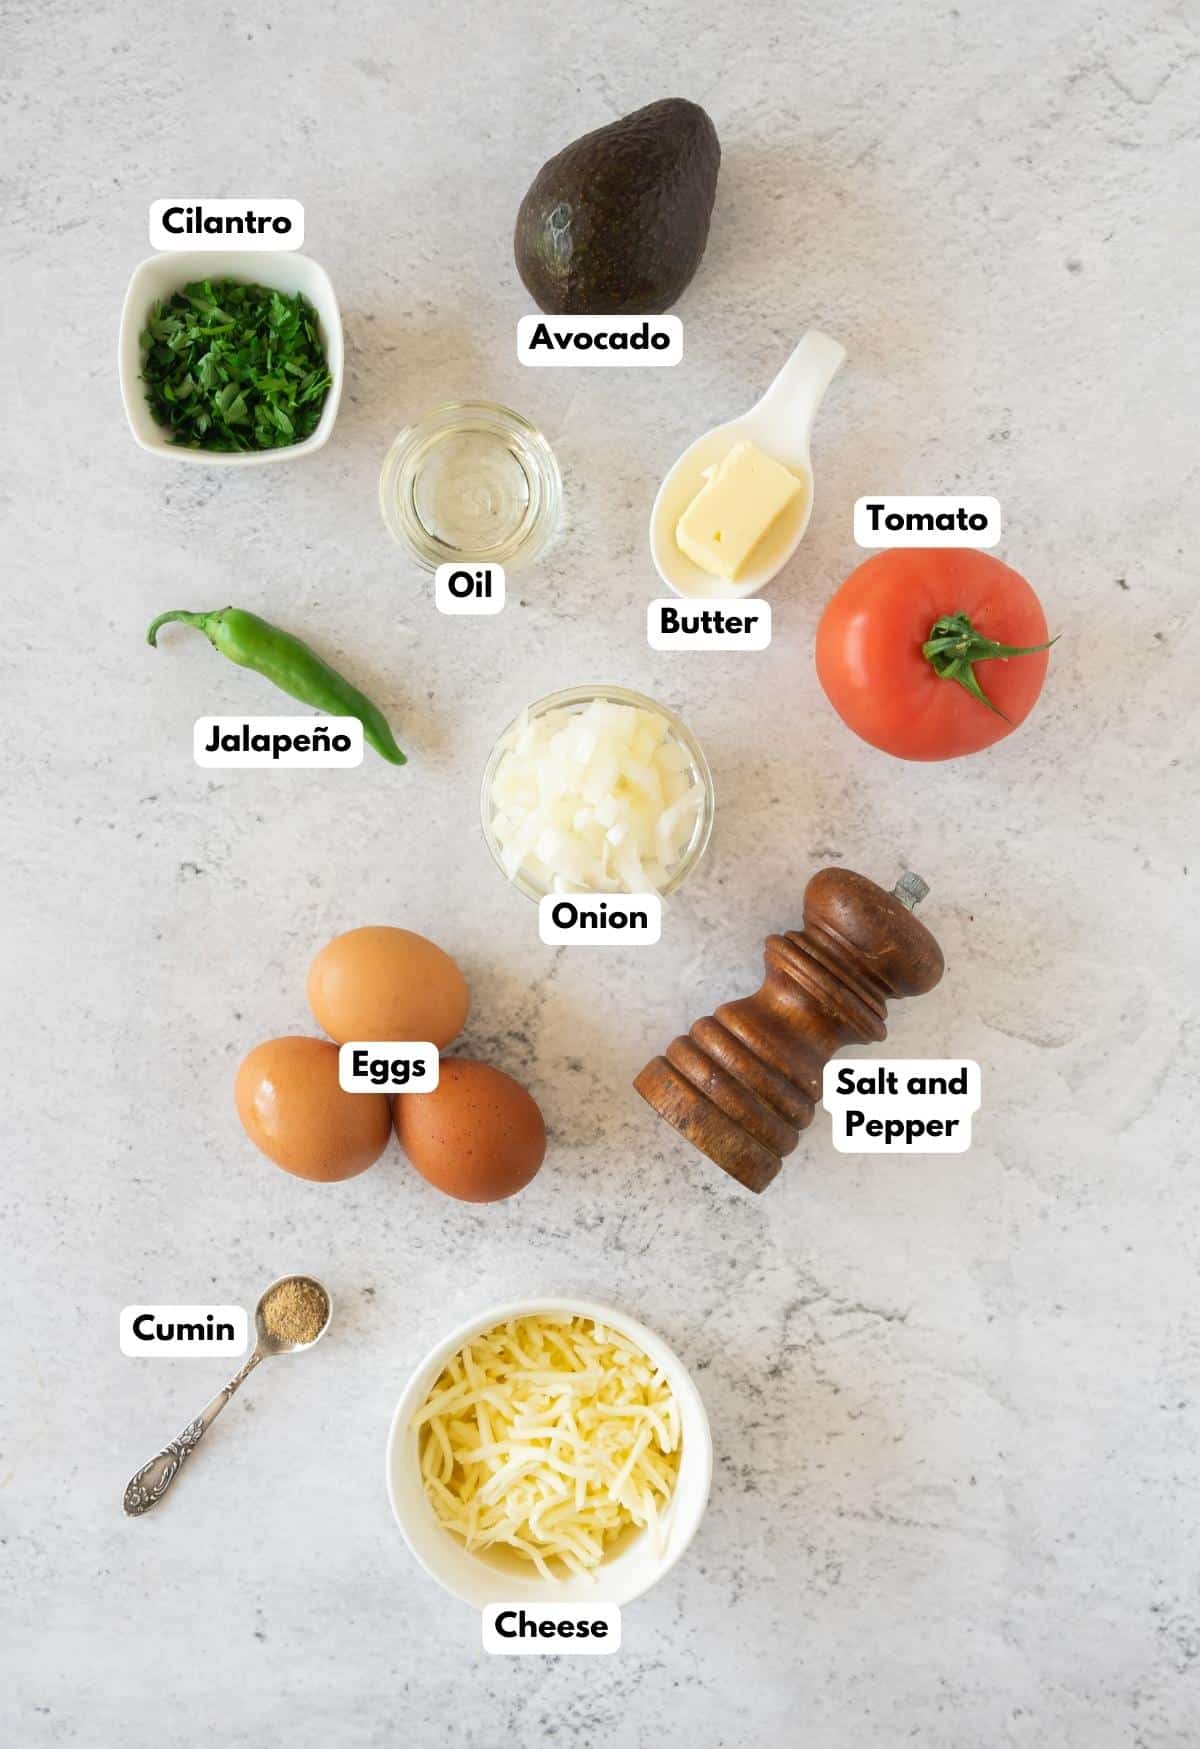 The ingredients needed to make the egg dish.